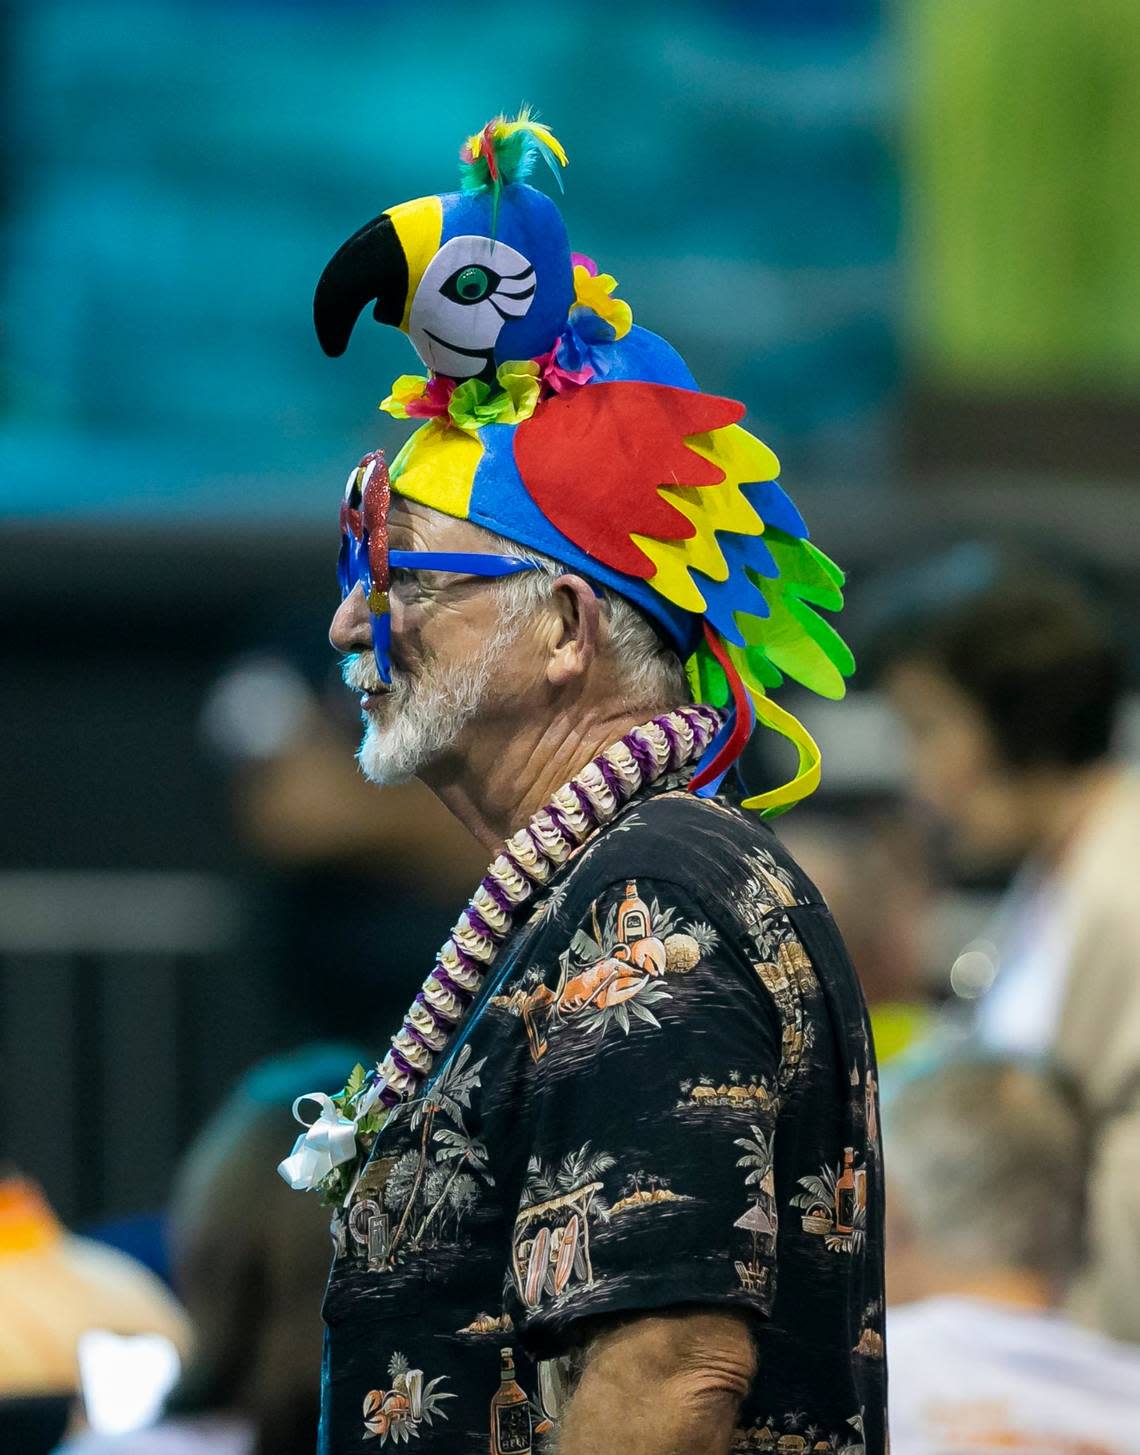 An attendee is seen before the start of a Jimmy Buffett concert at the iTHINK Financial Amphitheatre in West Palm Beach, Florida on Thursday, December 9, 2021. MATIAS J. OCNER/mocner@miamiherald.com